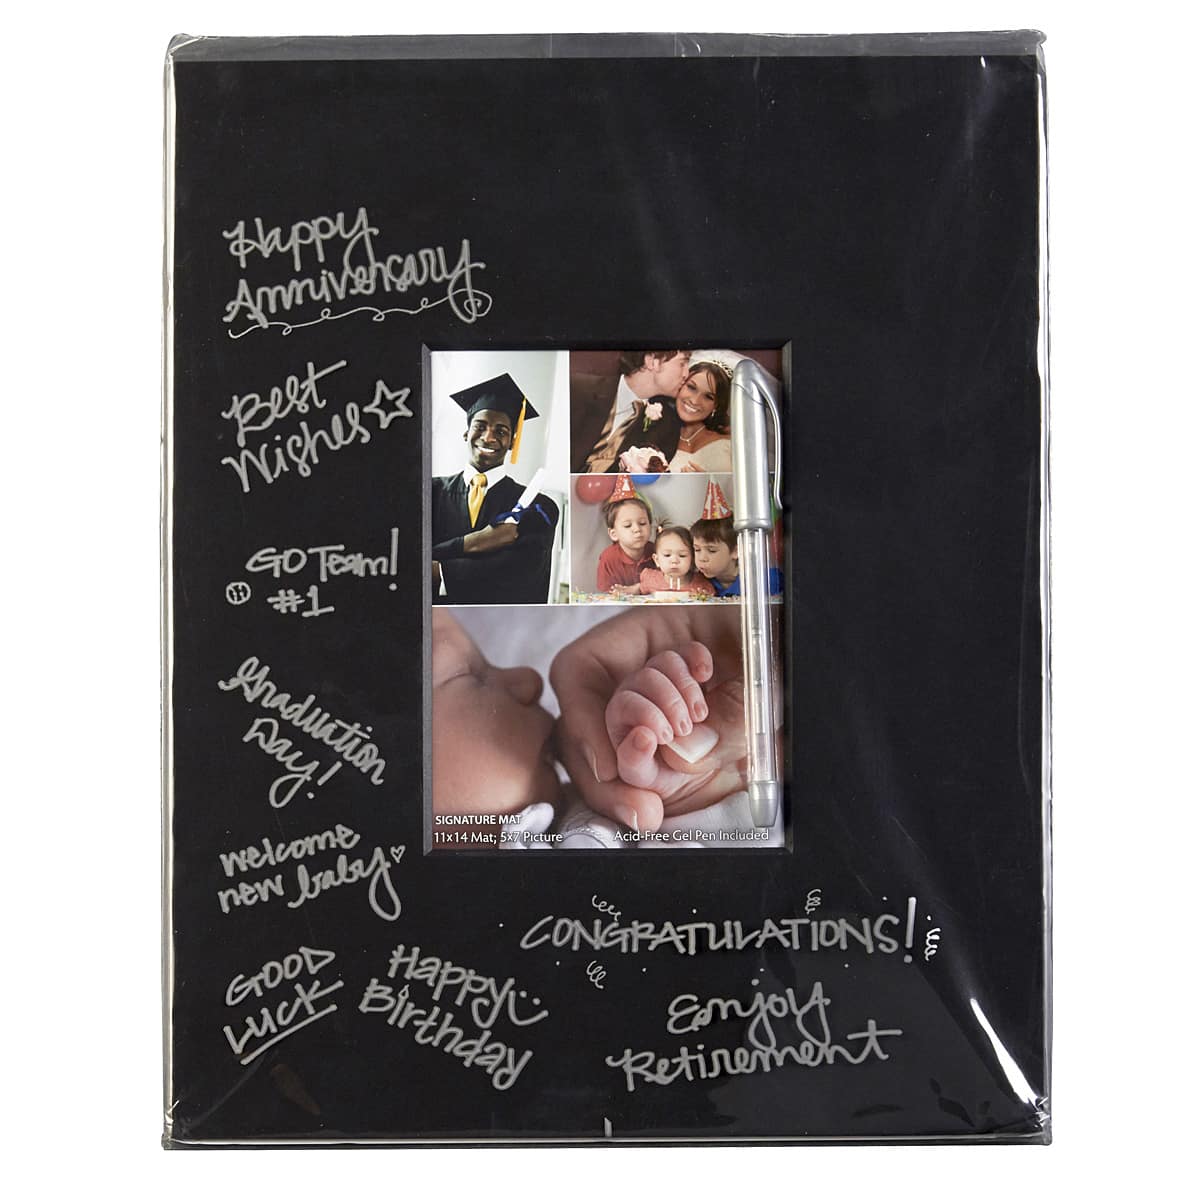 Hobby Lobby - Signature mats are back and more popular than ever this  wedding season! For larger weddings, use multiple frames to fit more  signatures without sacrificing on aesthetics. With this collage